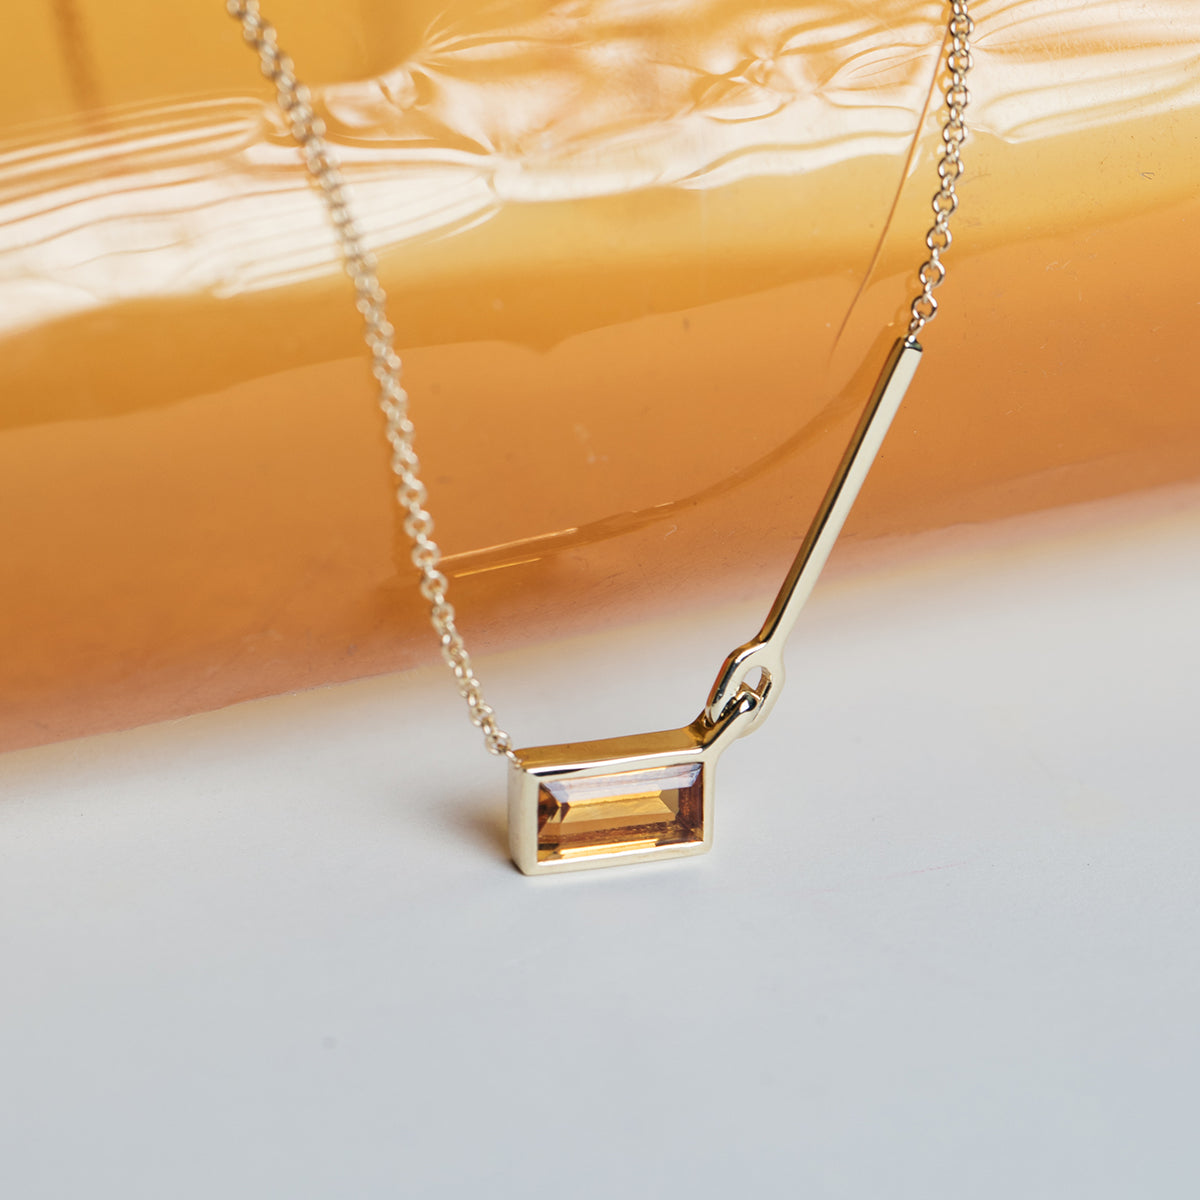 Amy Unique Necklace 14k Yellow Gold Set With Citrine By SHW Fine Jewelry NYC